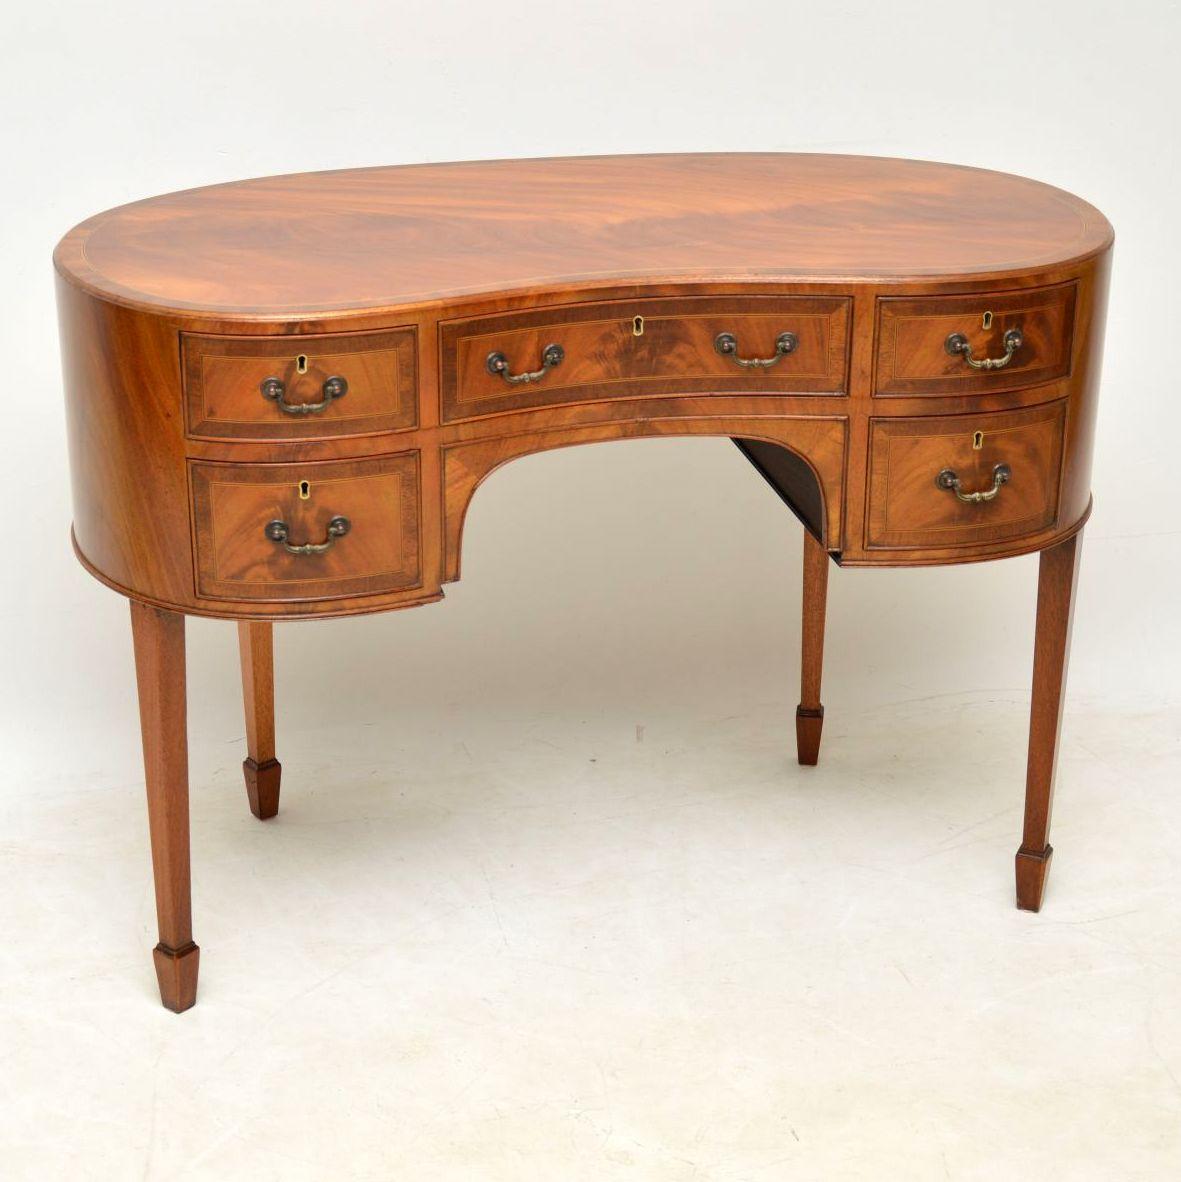 This antique kidney shaped table is fabulous quality and could be used for a desk or dressing table. It’s mainly flame mahogany with inlay and crossbanding on the top and on the drawer fronts. The pattern of the wood is really nice all-over and this